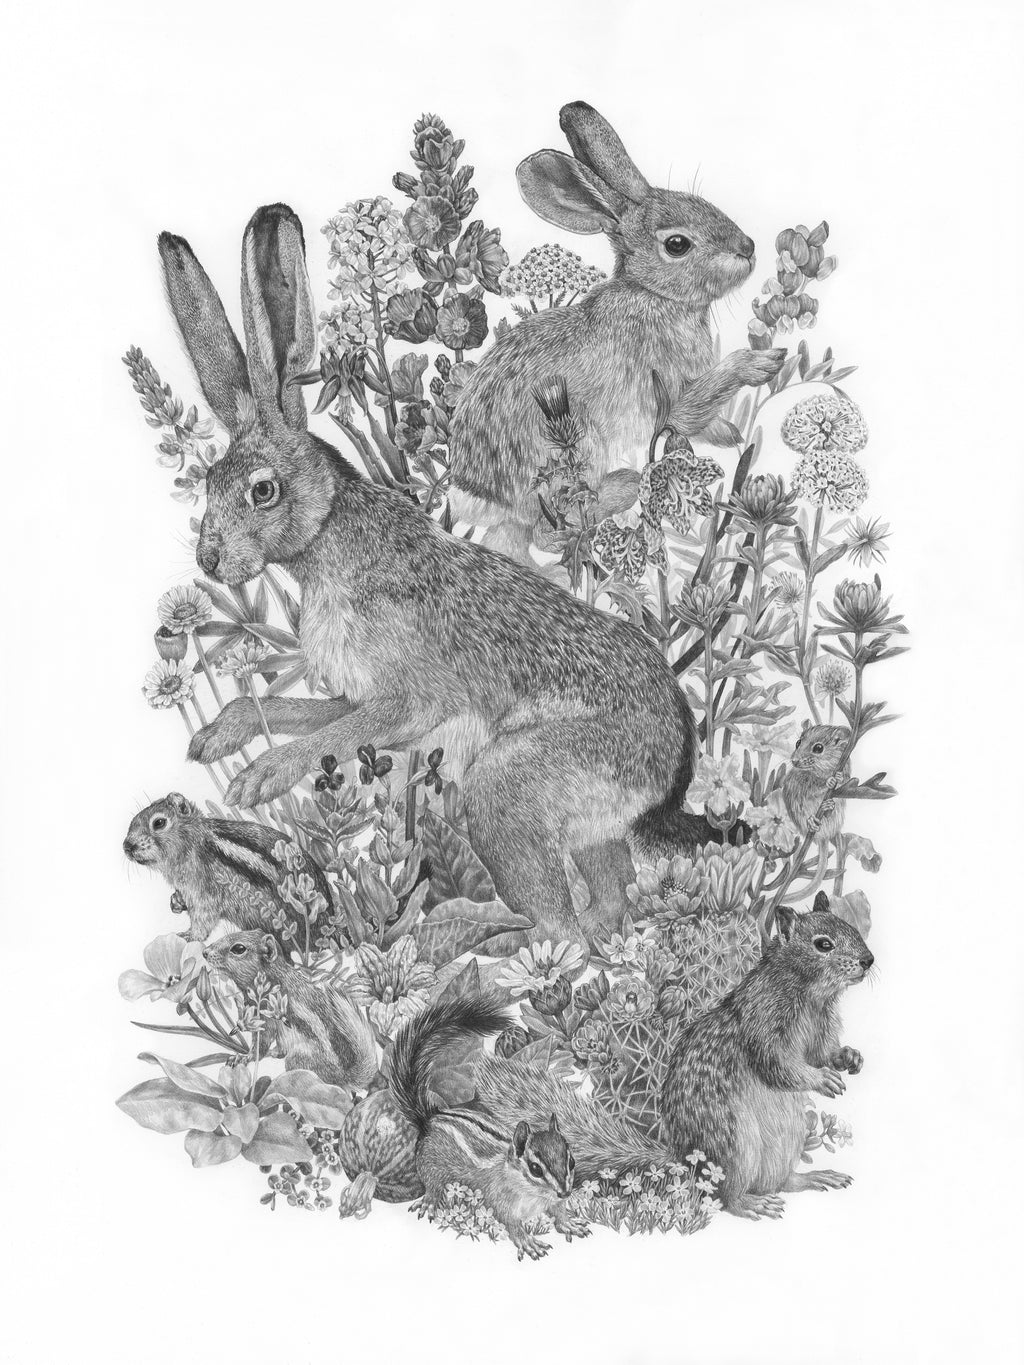 Zoe Keller - Common Small Mammals & Wildflowers of Zion National Park